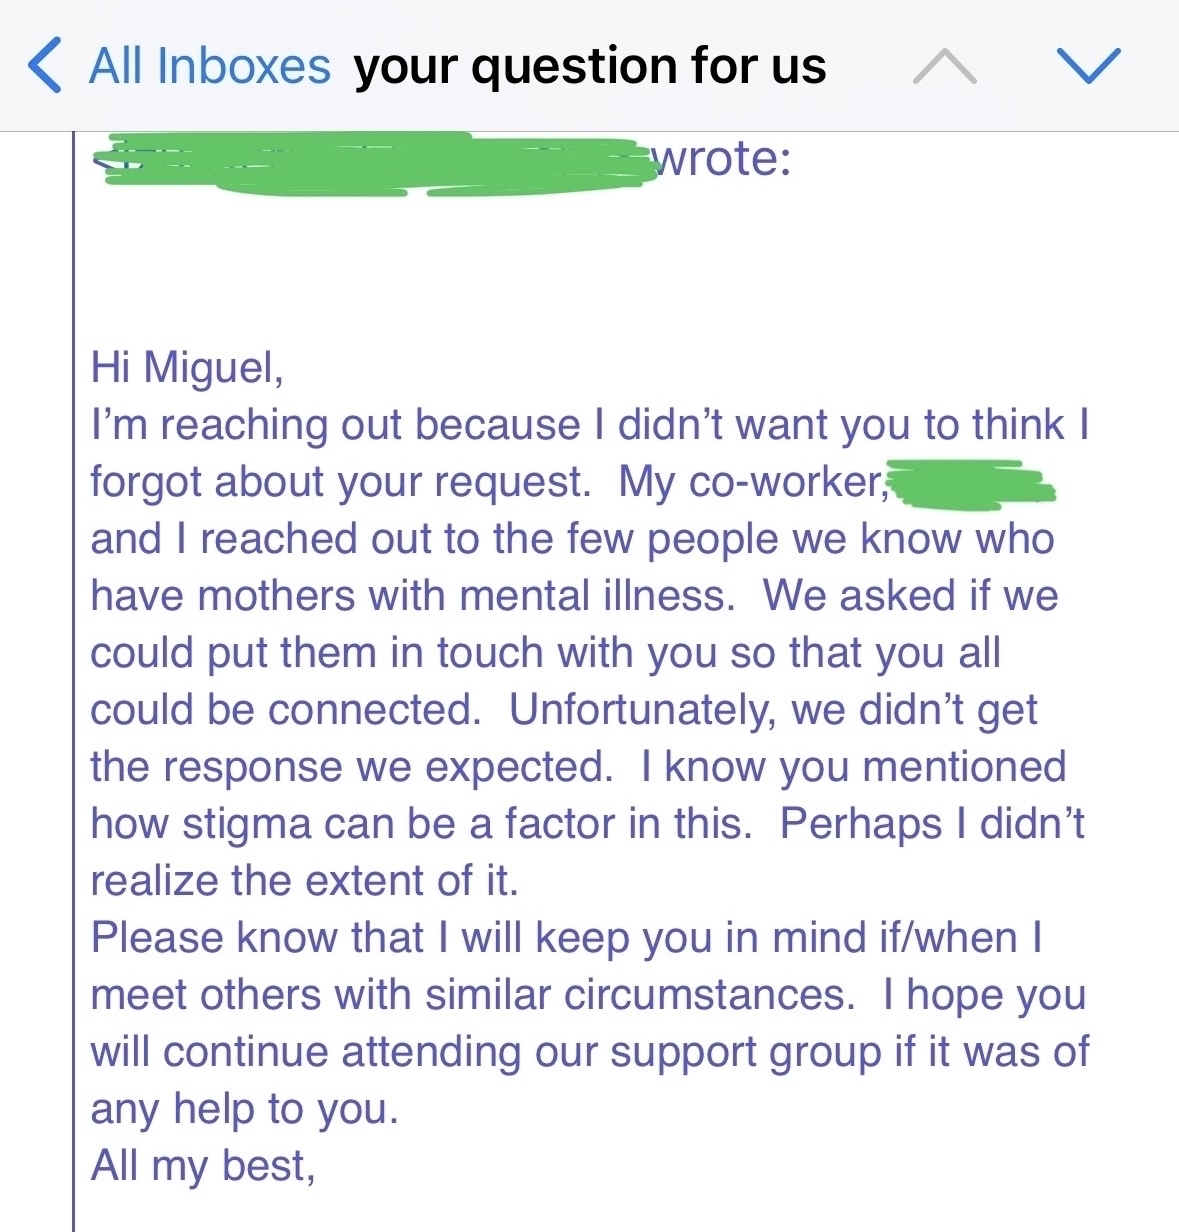 All Inboxes your question for us ^&10;wrote:&10;Hi Miguel,&10;I'm reaching out because I didn't want you to think I forgot about your request. My co-worker; and I reached out to the few people we know who have mothers with mental illness. We asked if we could put them in touch with you so that you all could be connected. Unfortunately, we didn't get the response we expected. I know you mentioned how stigma can be a factor in this. Perhaps I didn't realize the extent of it.&10;Please know that I will keep you in mind if/when I meet others with similar circumstances. I hope you will continue attending our support group if it was of any help to you.&10;All my best,